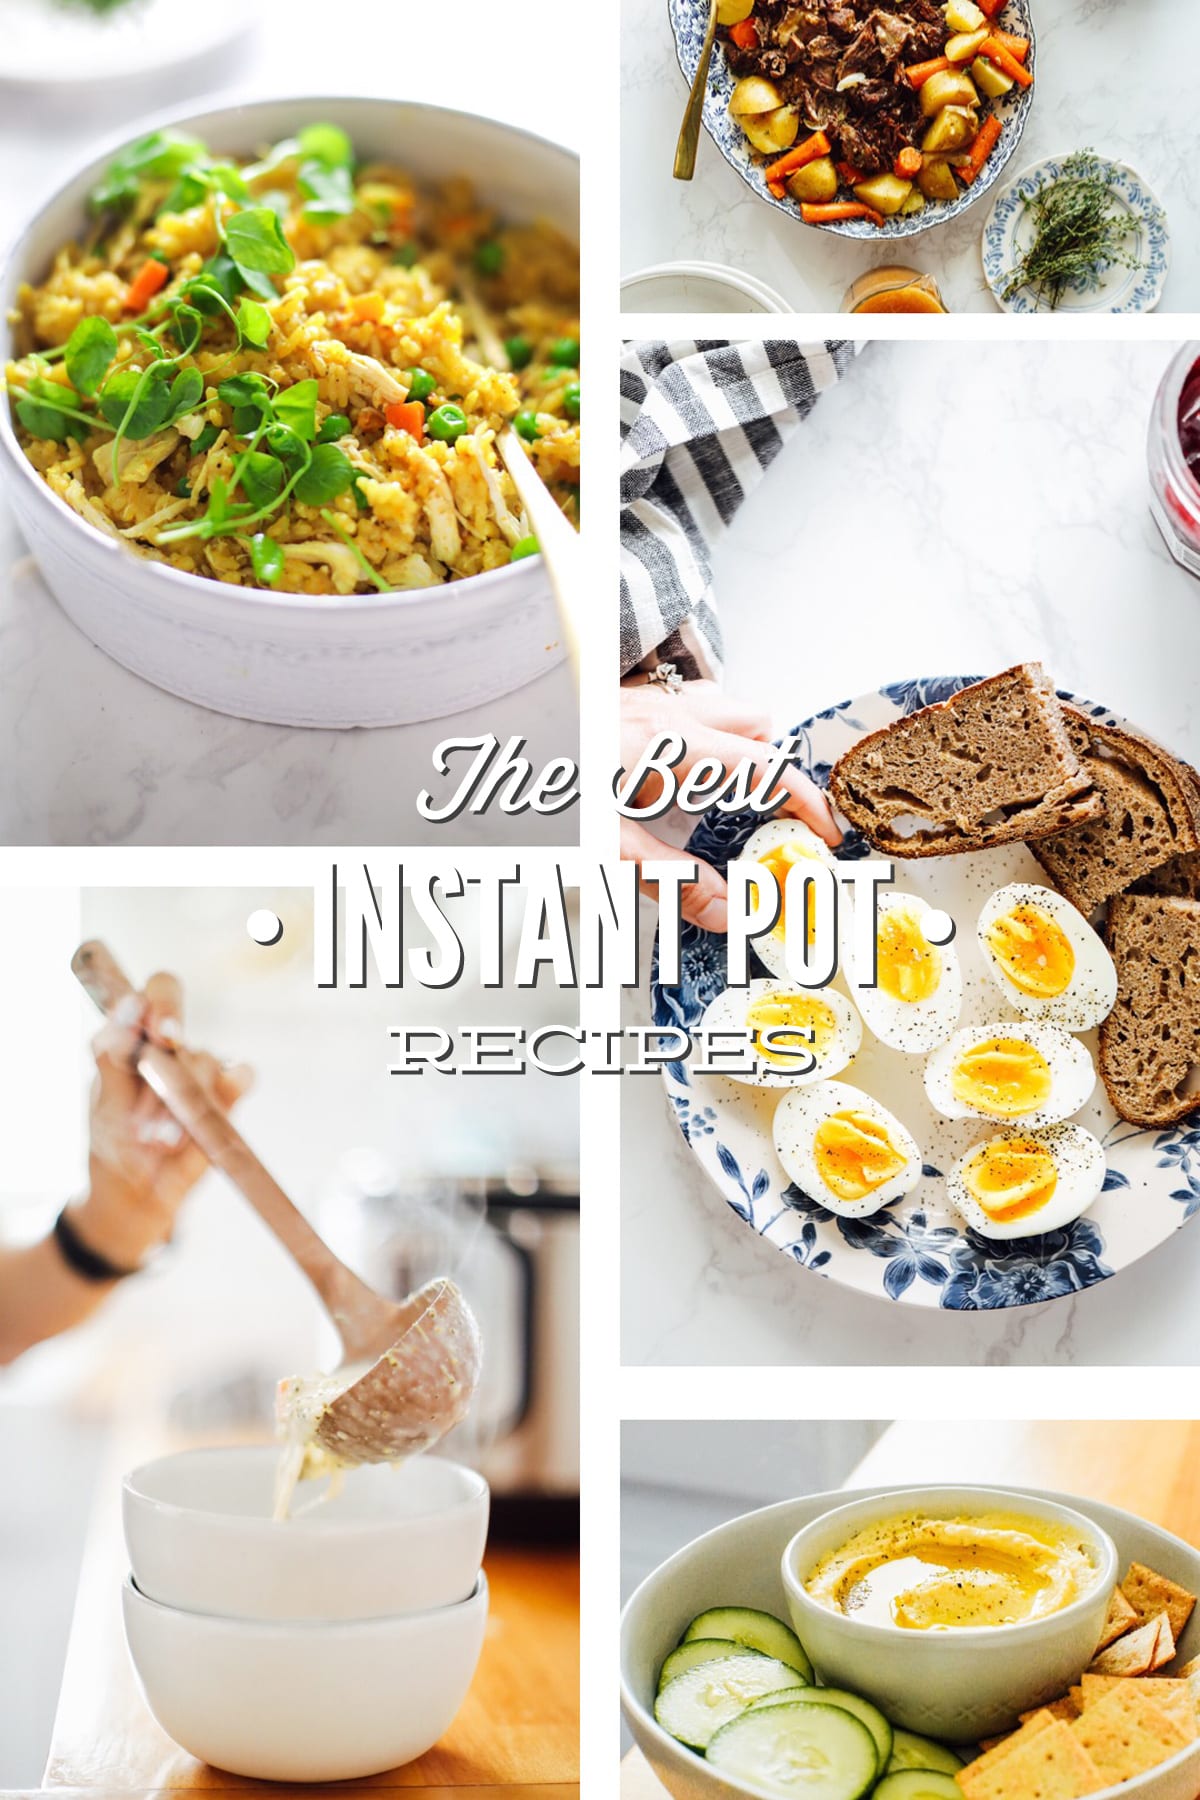 The Best Instant Pot Recipes (Healthy, Real Food) - Live Simply